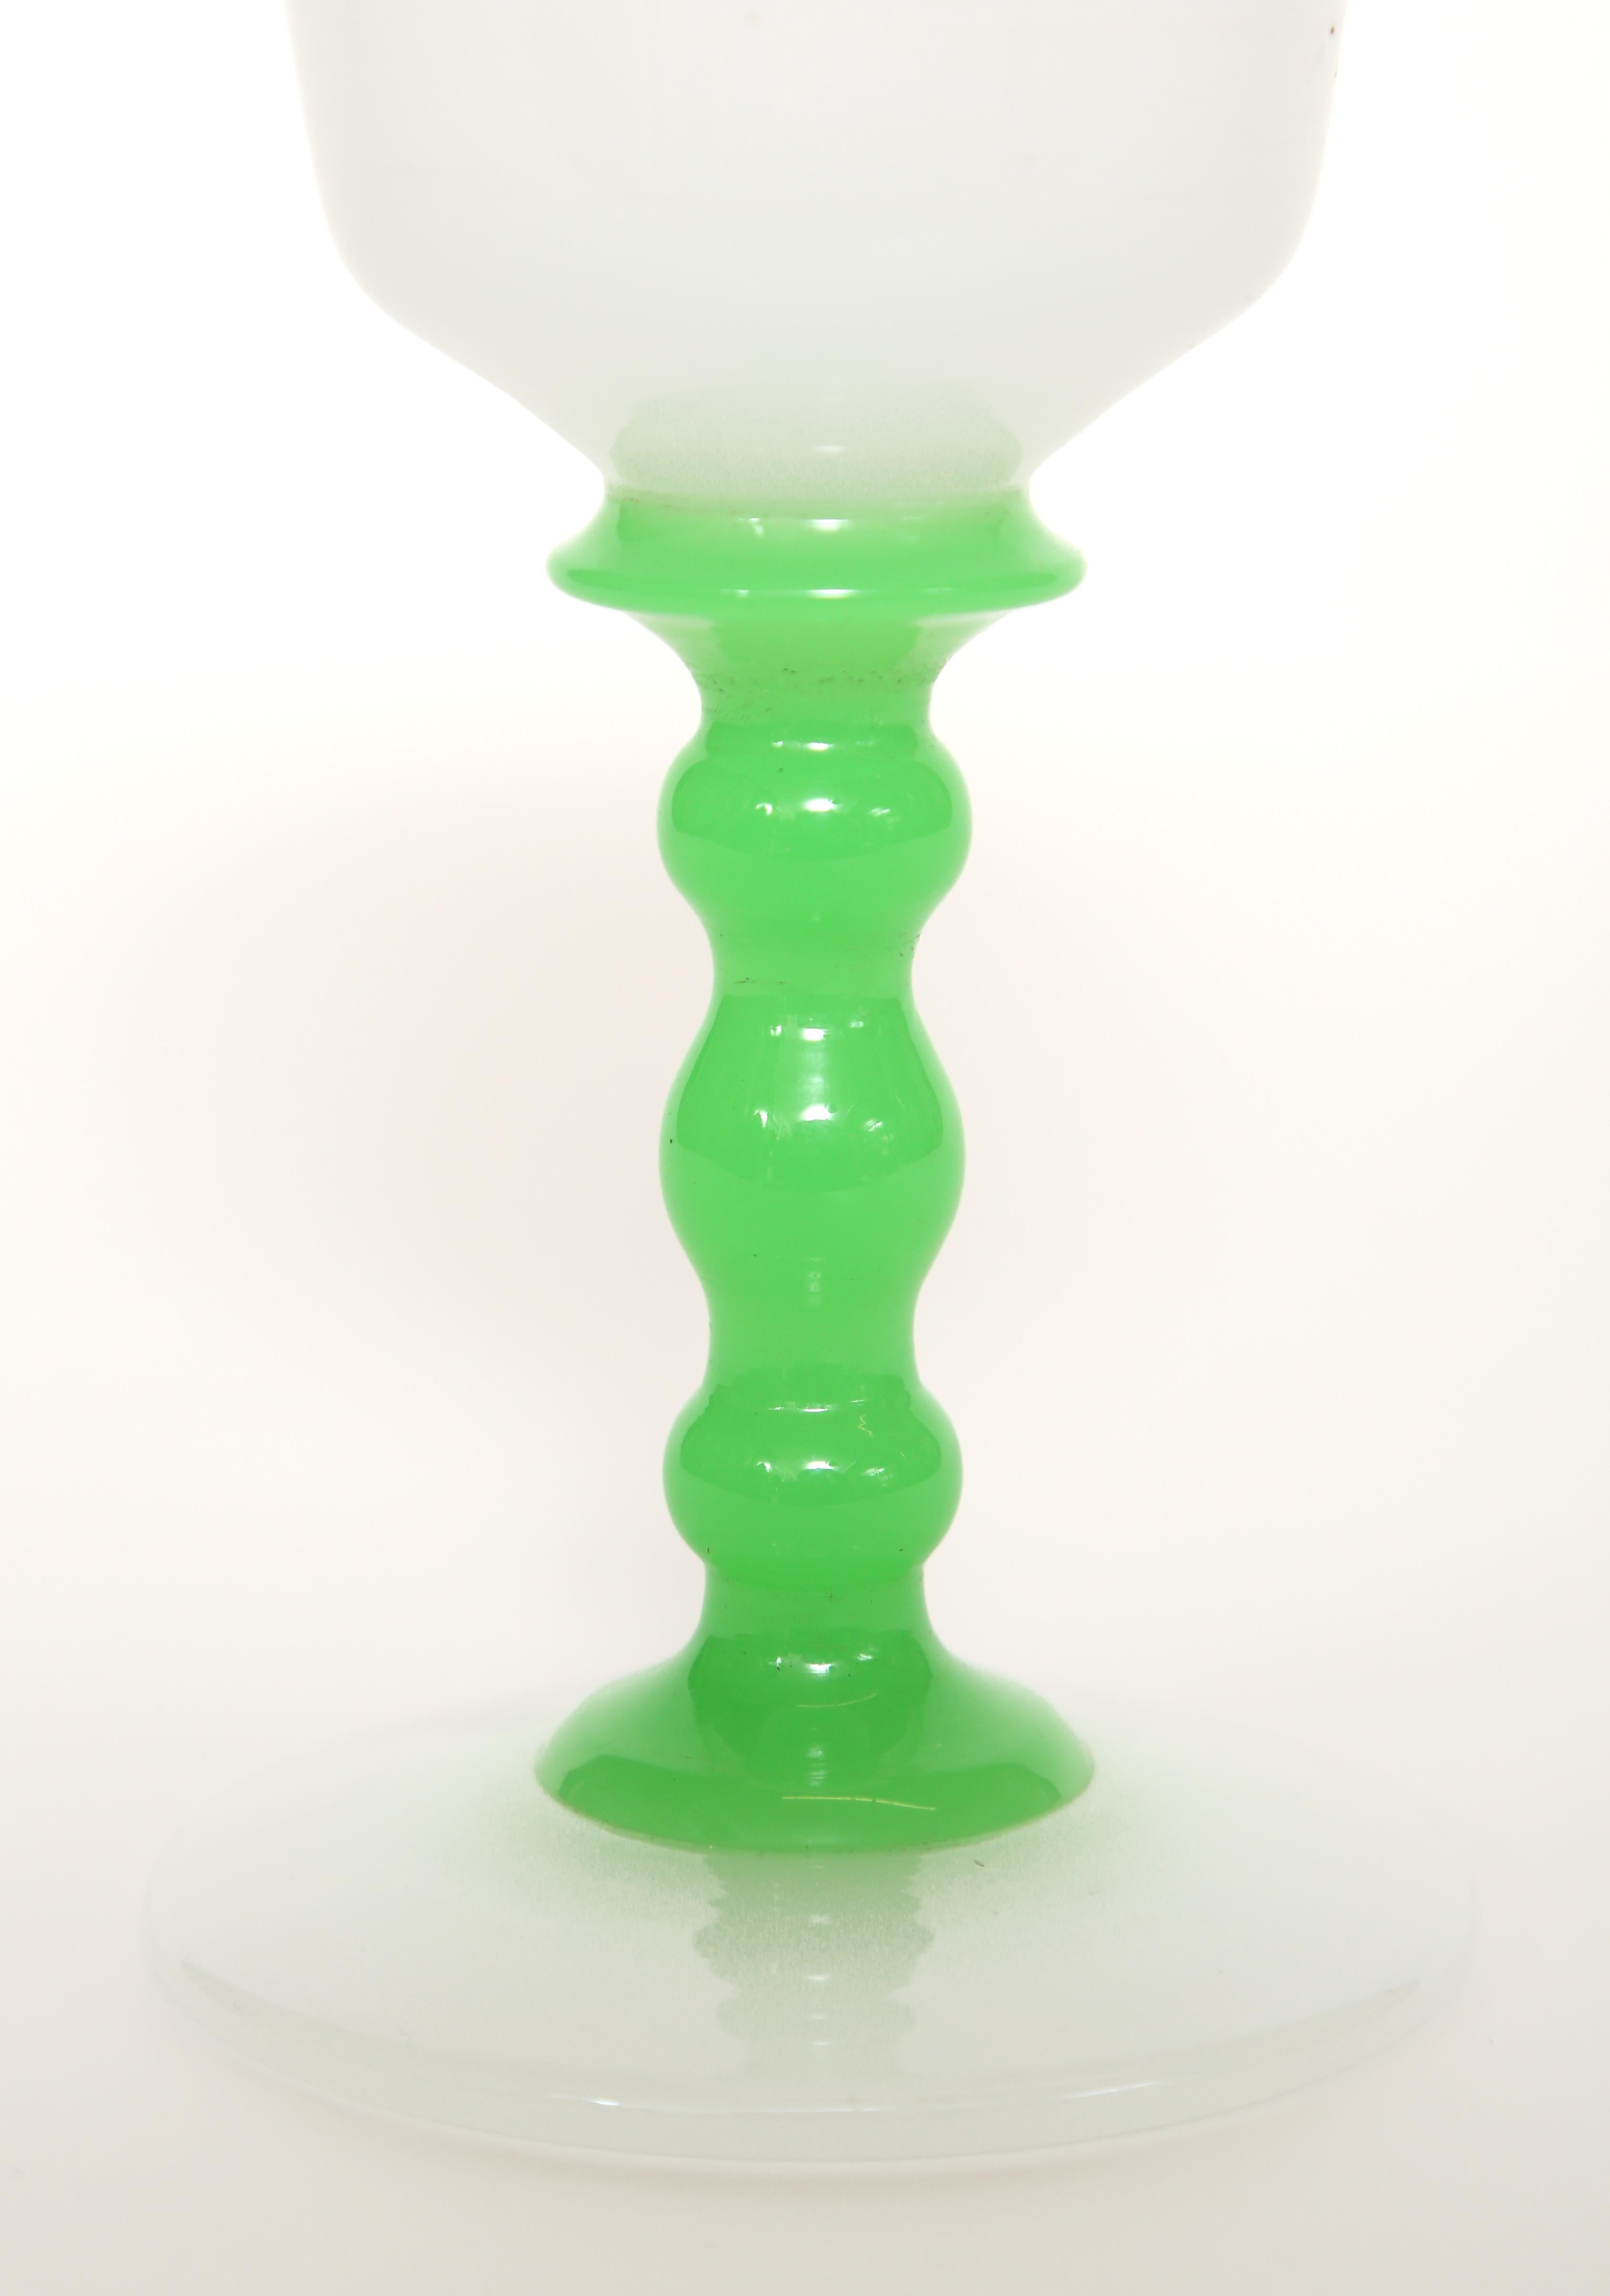 Steuben or Stevens & Williams opaline alabaster colored glass goblet with a jade green stem. The jade green color is luminous. This goblet or wine glass is hand blown with a polished pontil on the base. Frederick Carder produced many pieces of glass